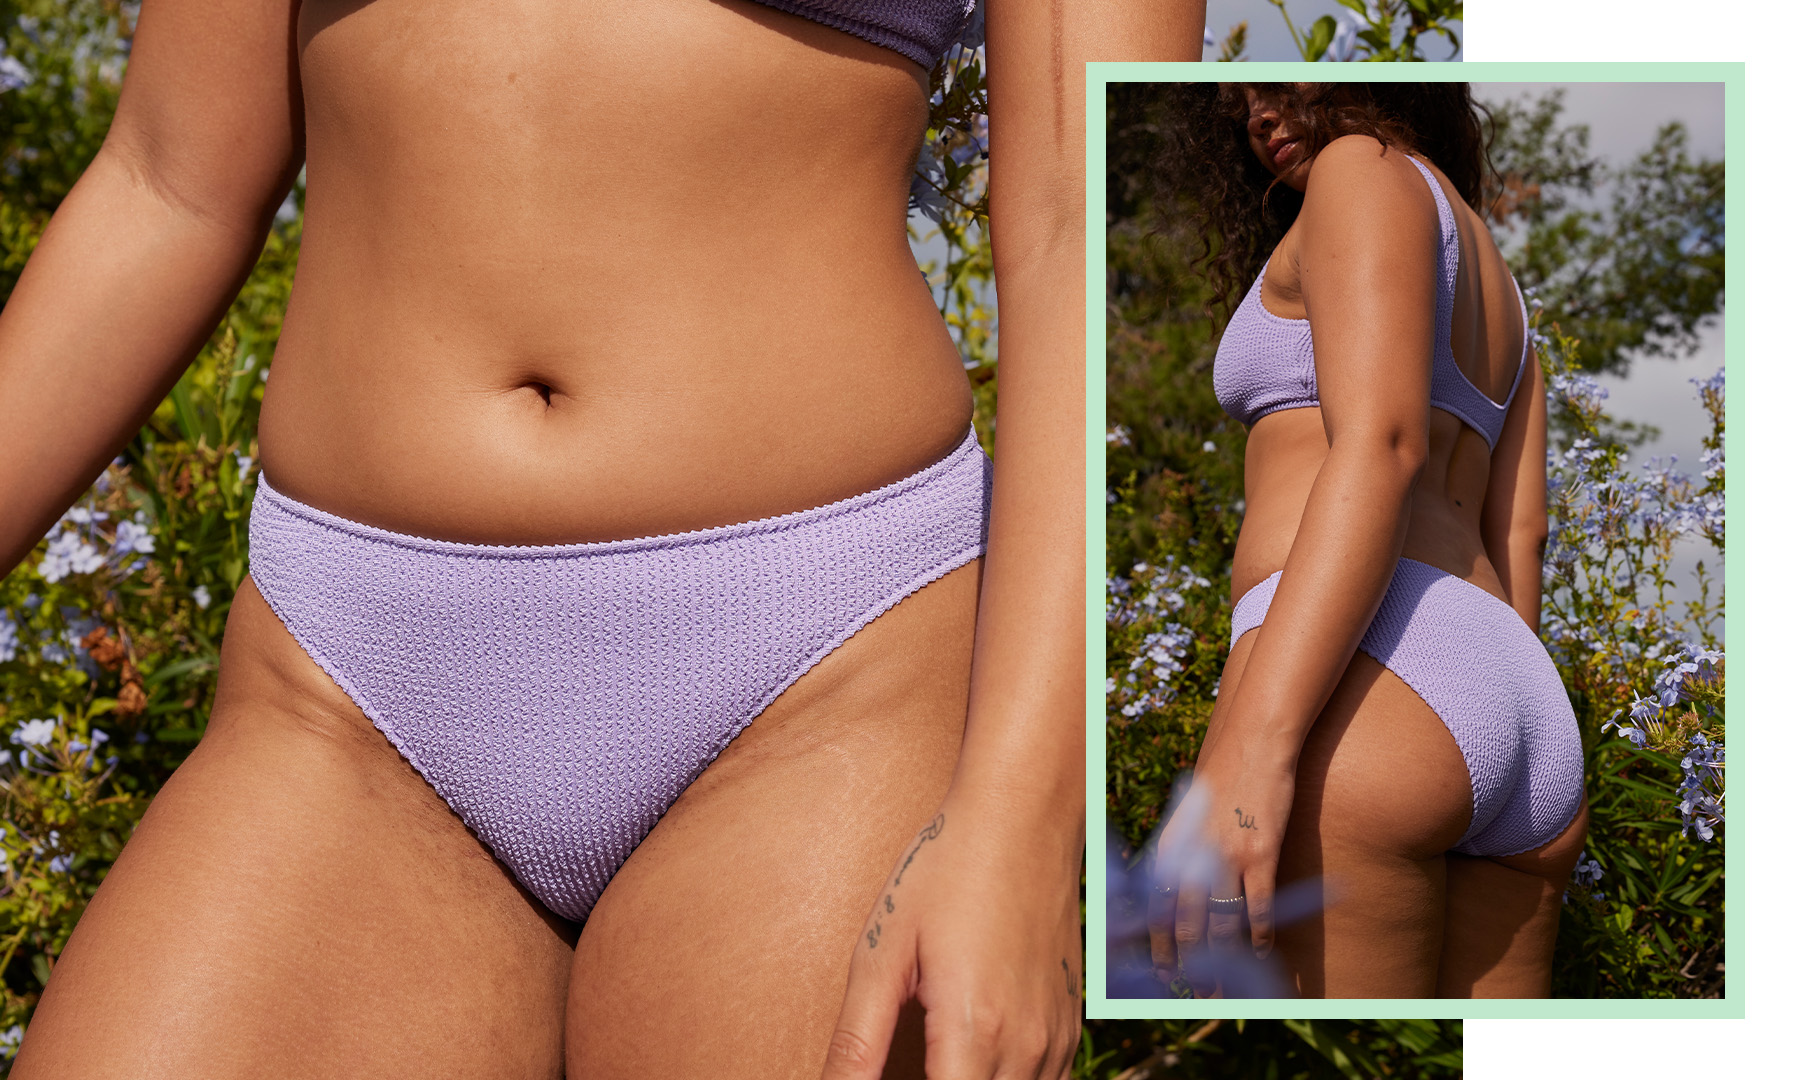 Bottoms up! A guide to finding the perfect bikini bottom fit.